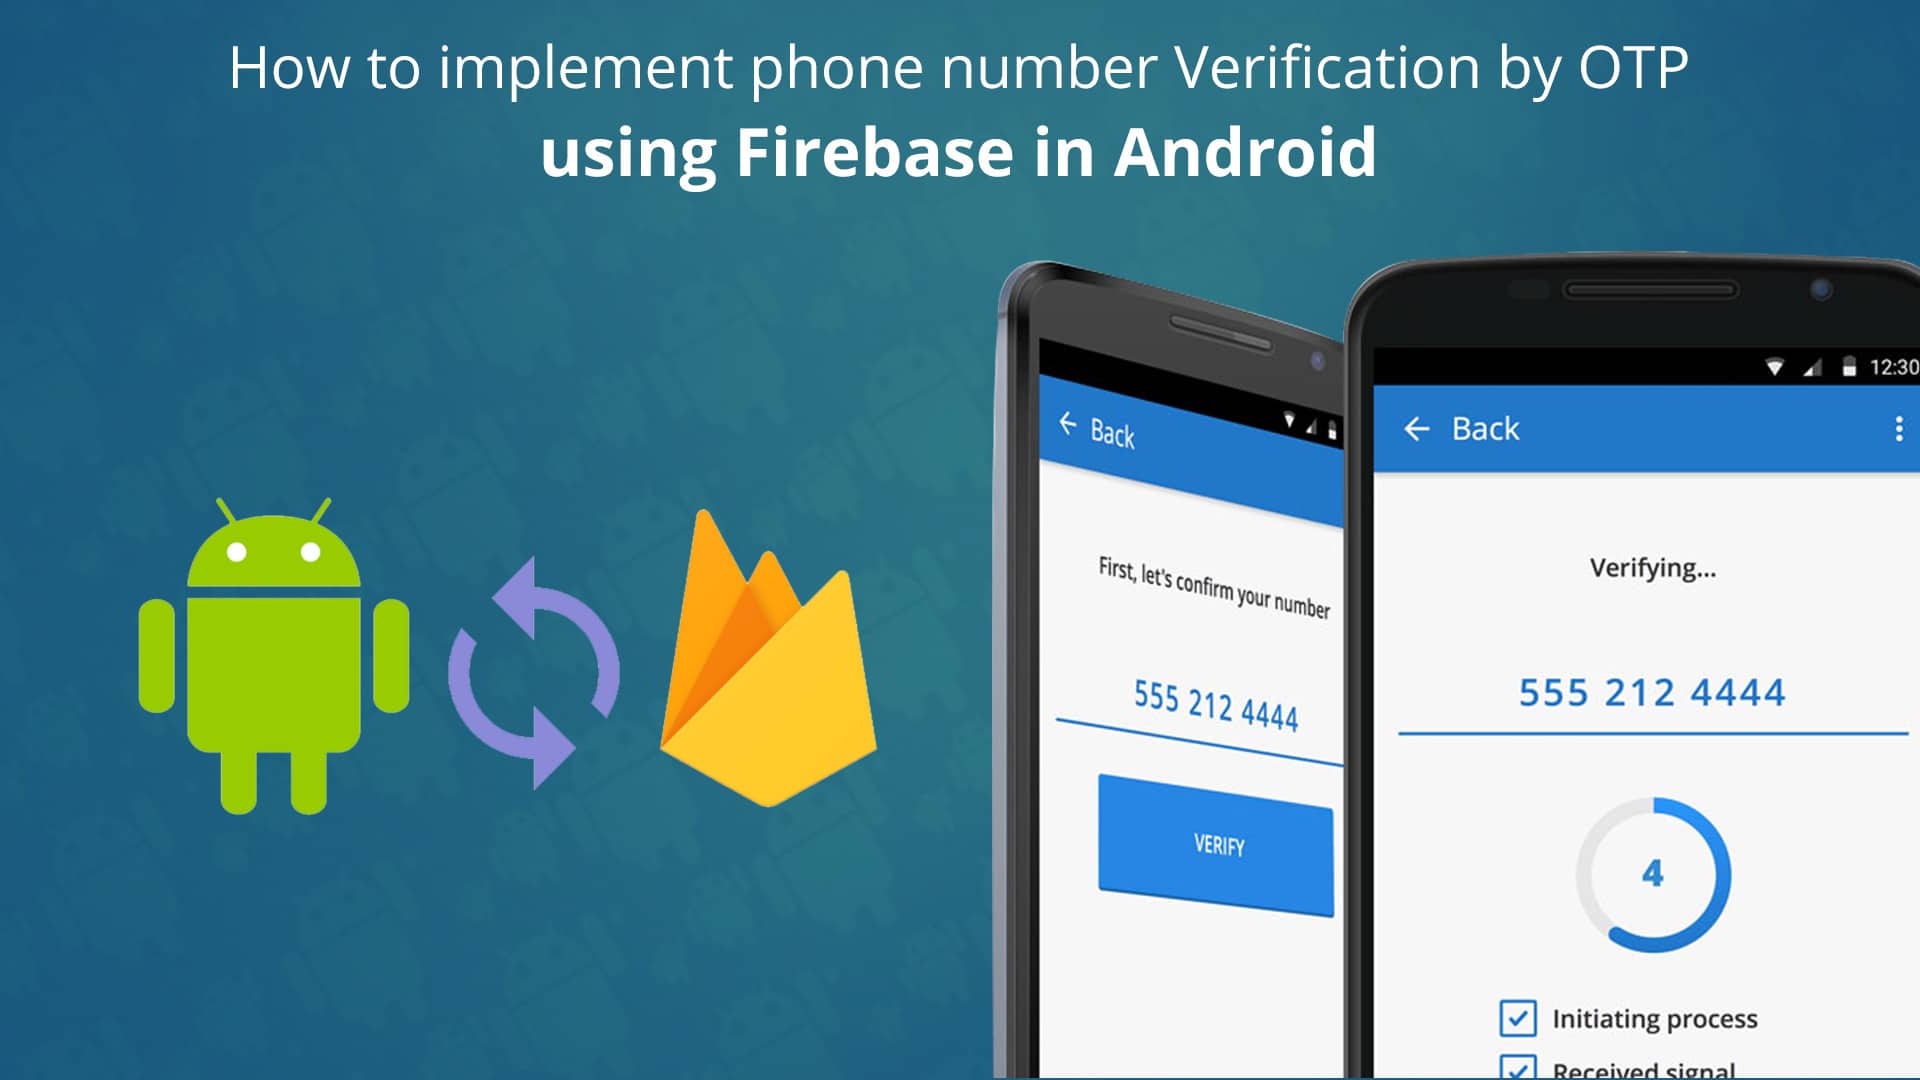 Phone Number Verification by OTP using Firebase in Android